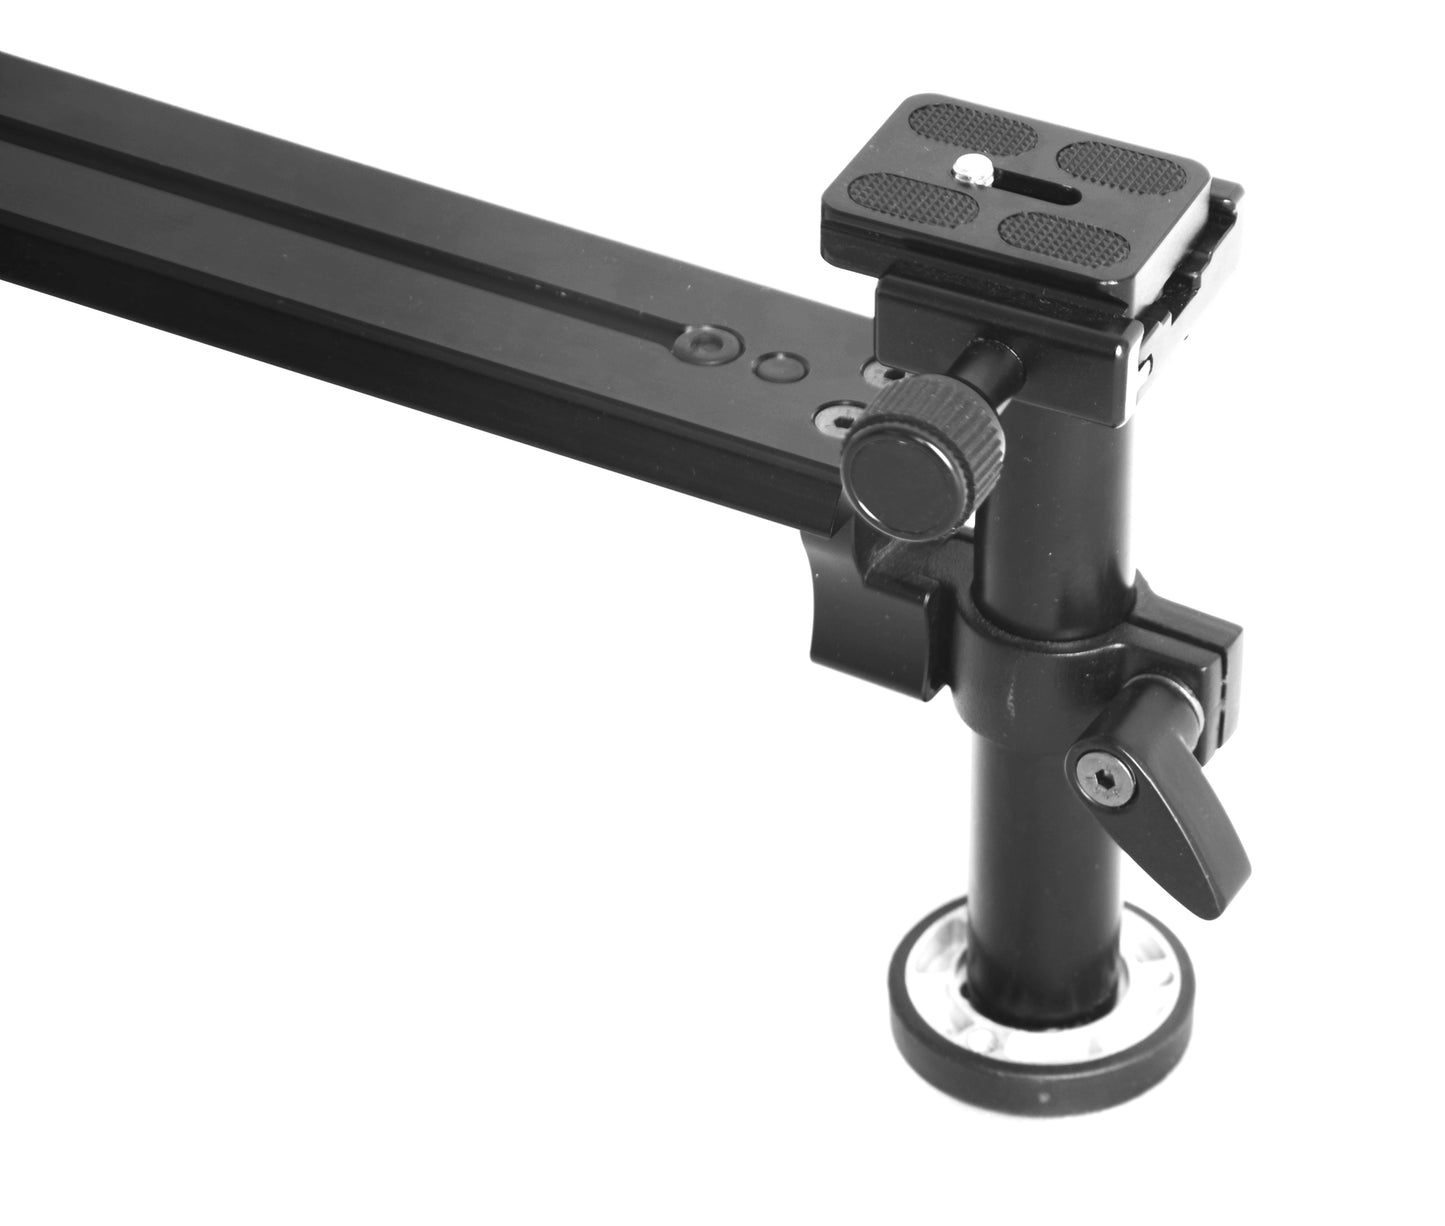 Kingjoy KH-6811 telephoto lens holder with quick release plate for ball head-1.37lbs, 16in